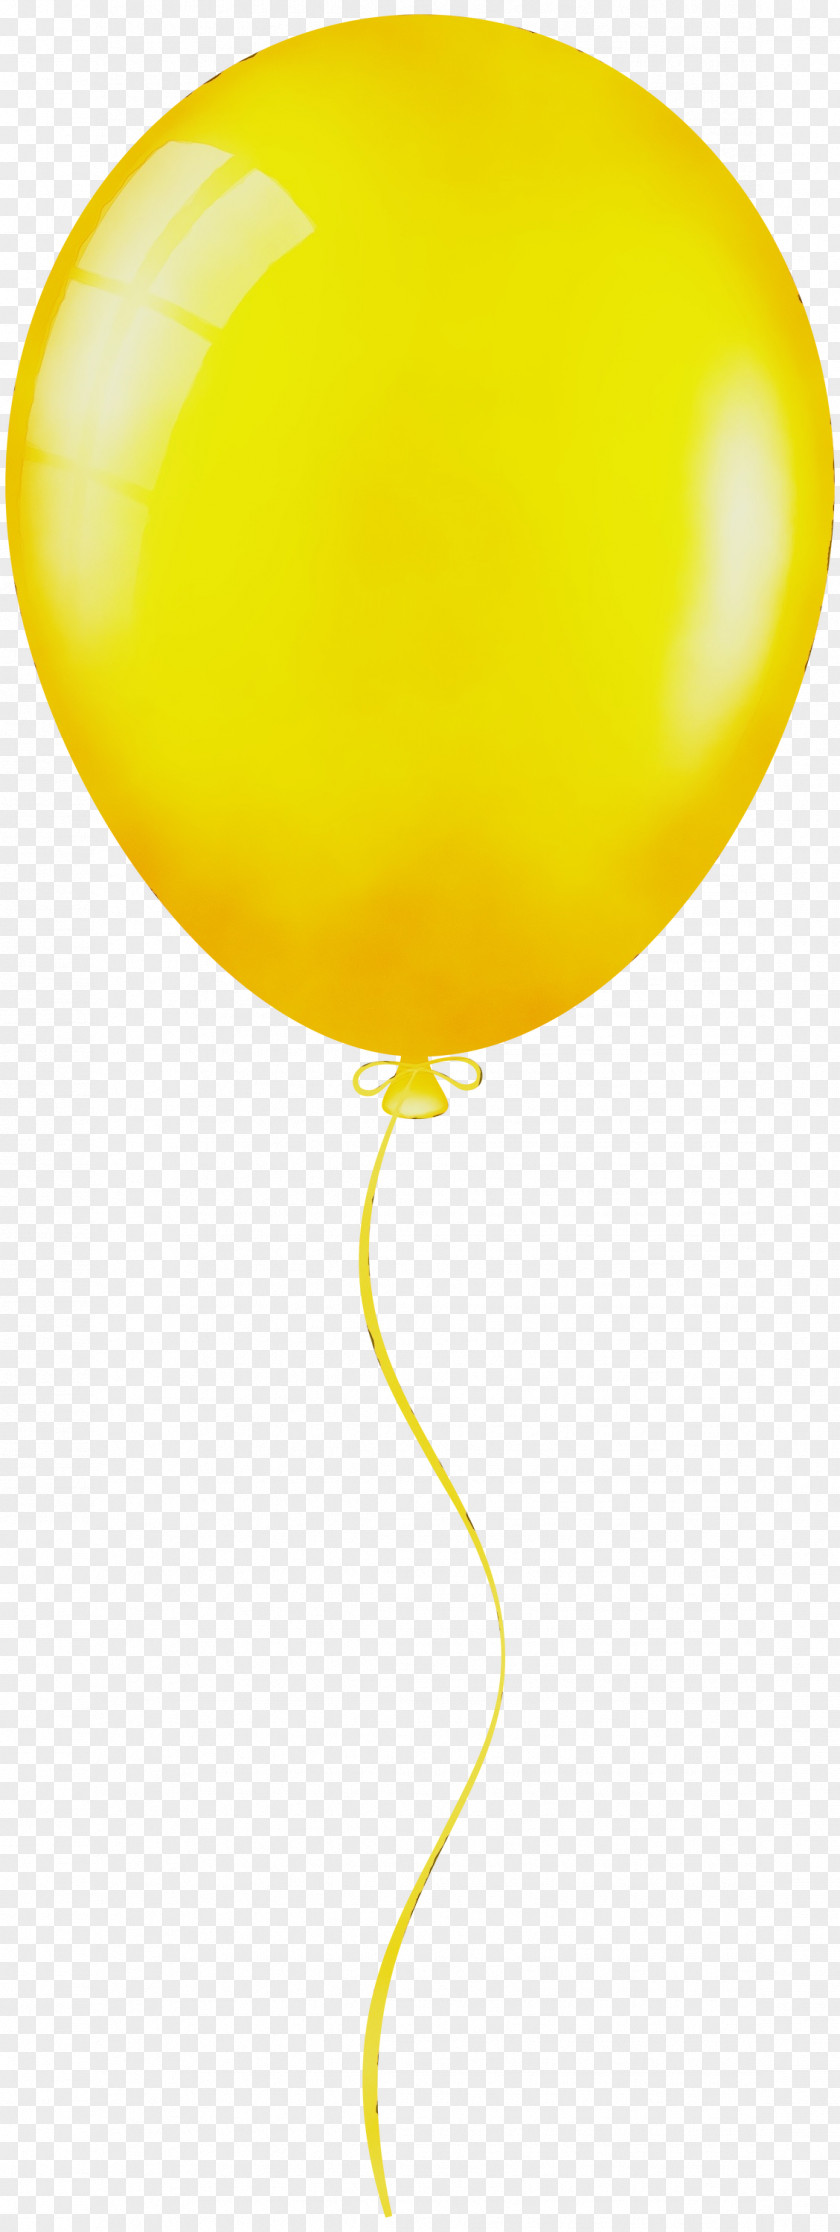 Toy Smile Yellow Balloons Cluster Ballooning Birthday PNG